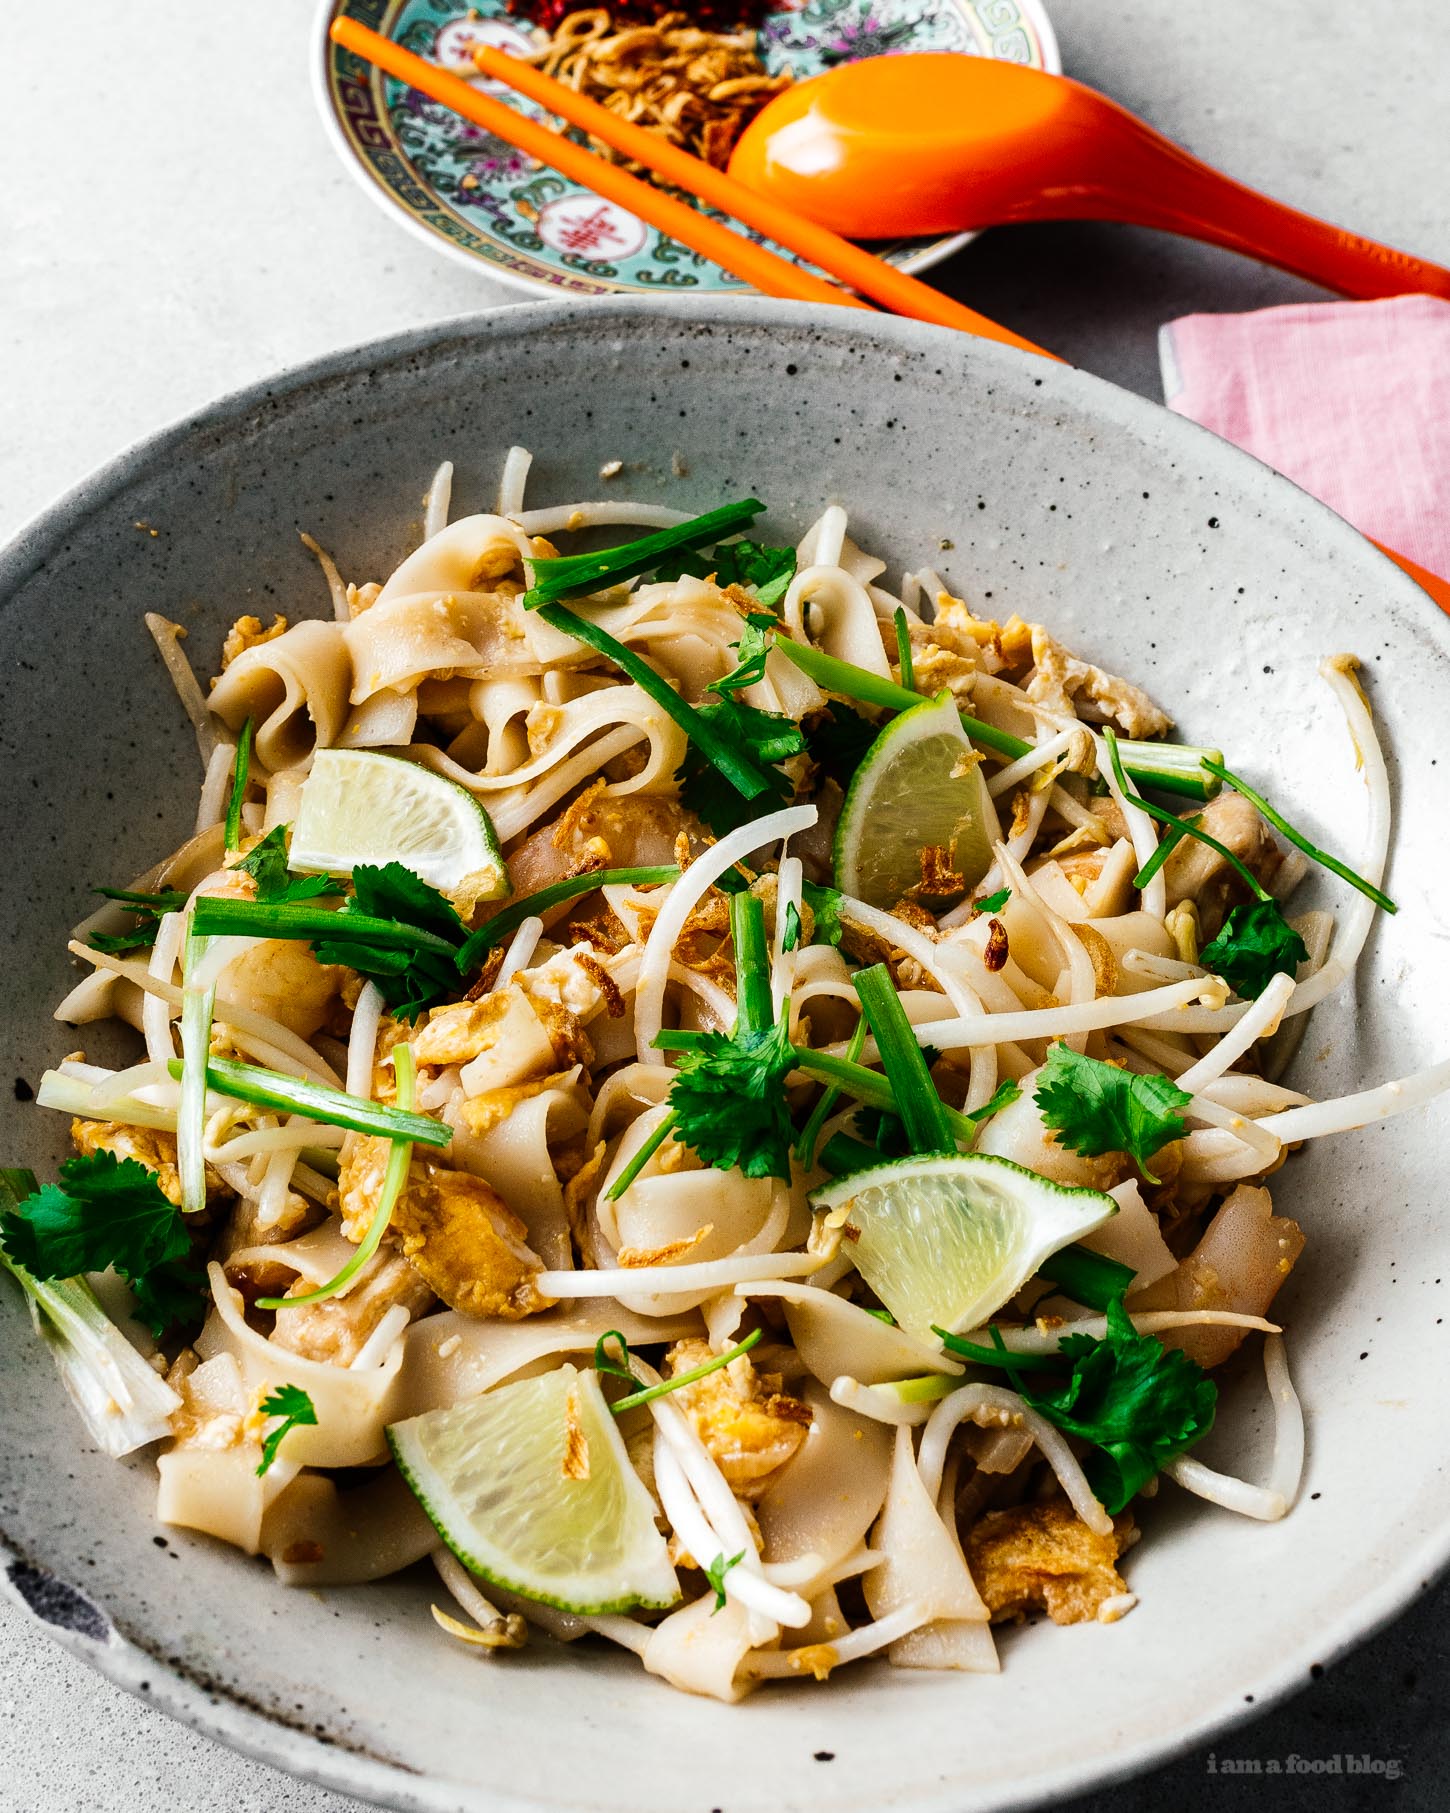 Make better than take out chicken and shrimp peanut free pad Thai right at home. Sweet, salty, savory – pad Thai is universally loved and for good reason. Forget delivery and customize your Pad Thai just the way you like it – this one had no peanuts because around here we do the #peanutfree life. Instead, there are buttery roasted cashews for that nutty crunch. #padthai #recipes #dinner #noodles #padthairecipe #thairecipes